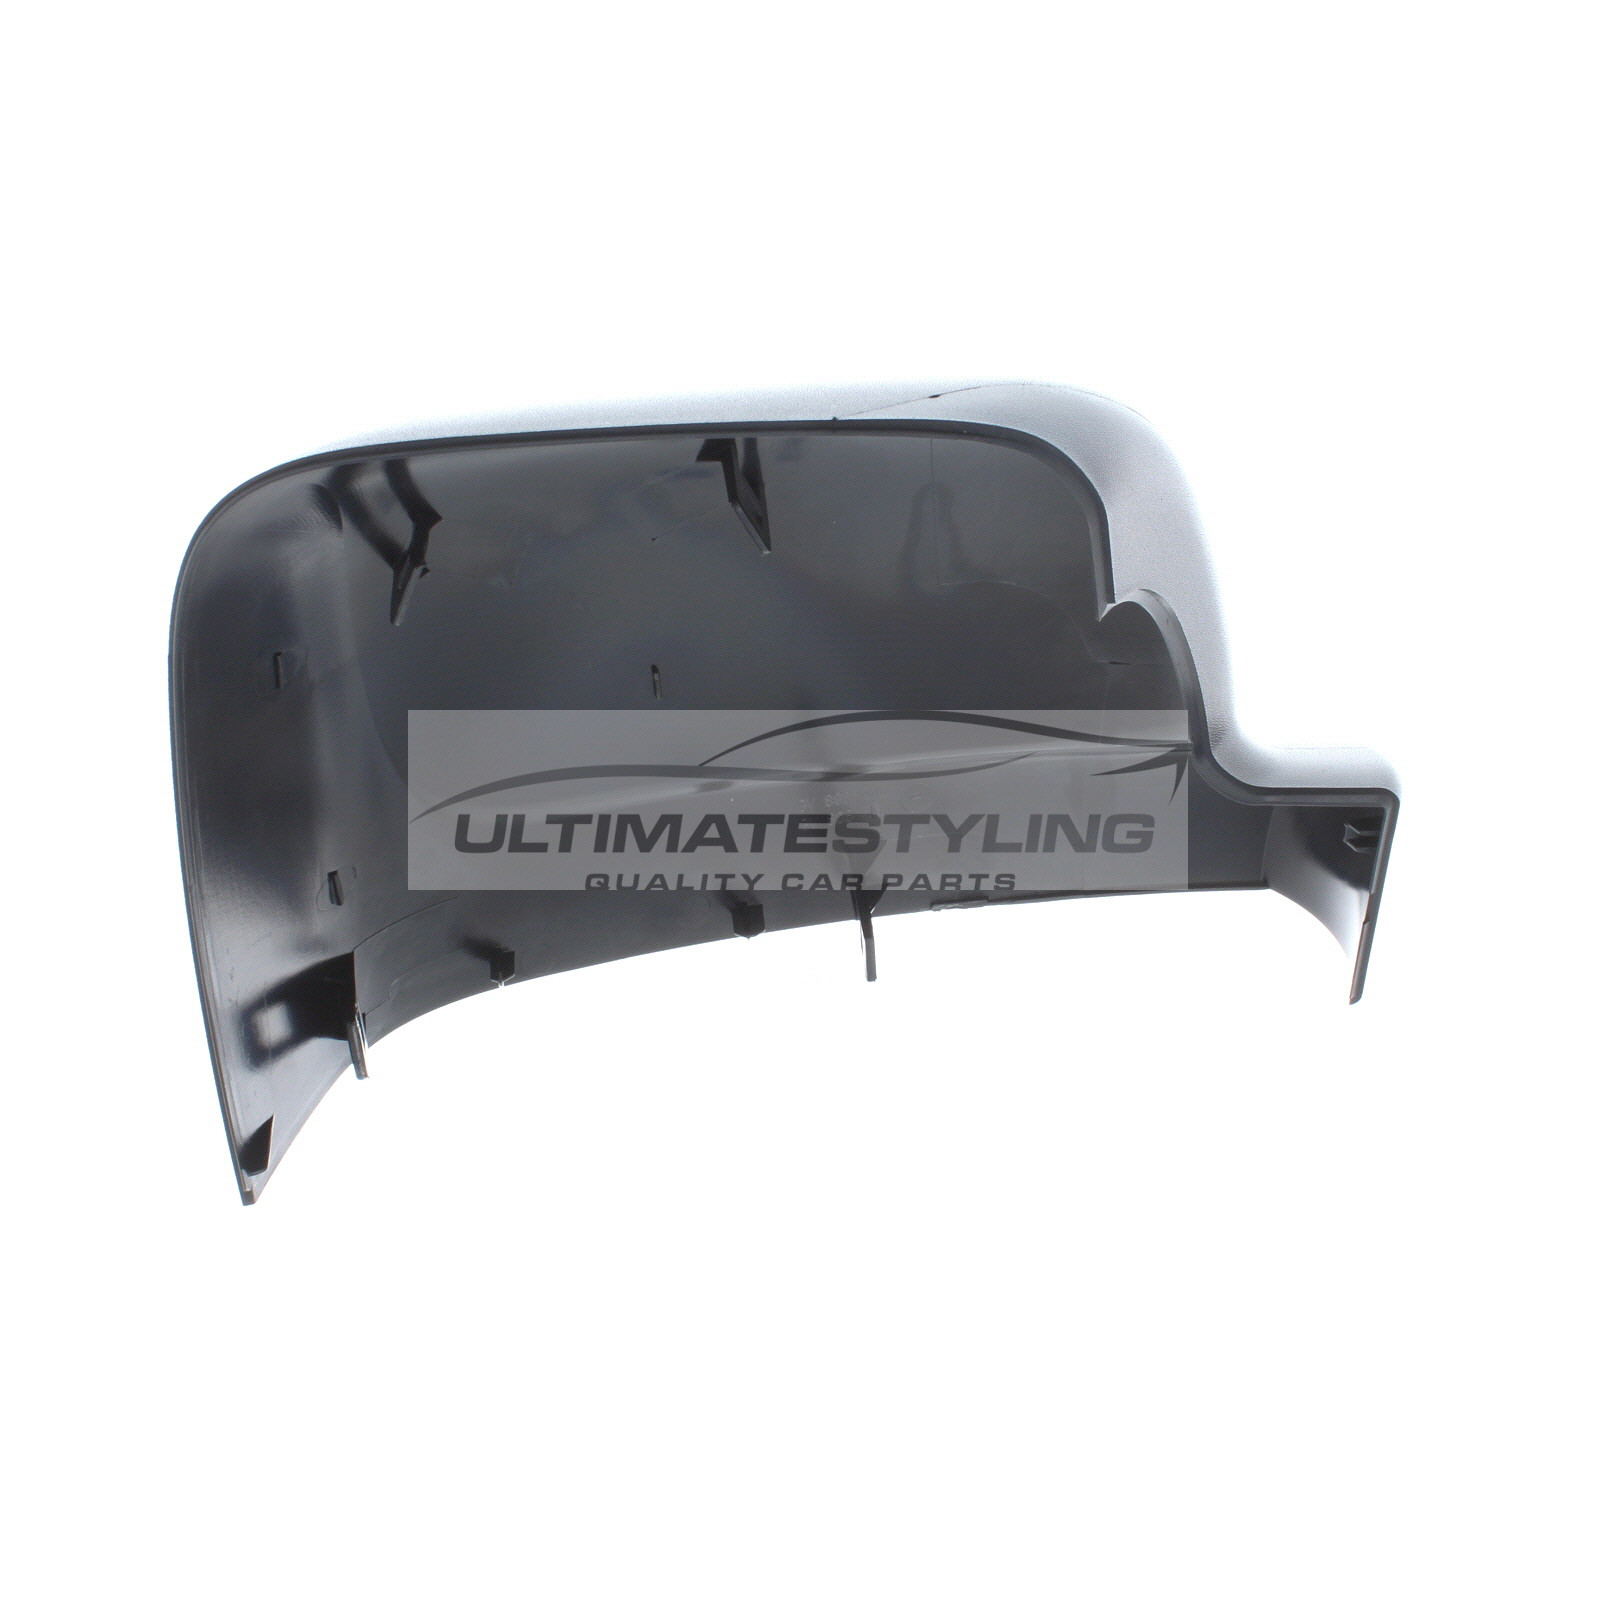 LEFT SIDE MIRROR HOUSE COVER FOR RENAULT TRAFIC X82 2014 ONWARD